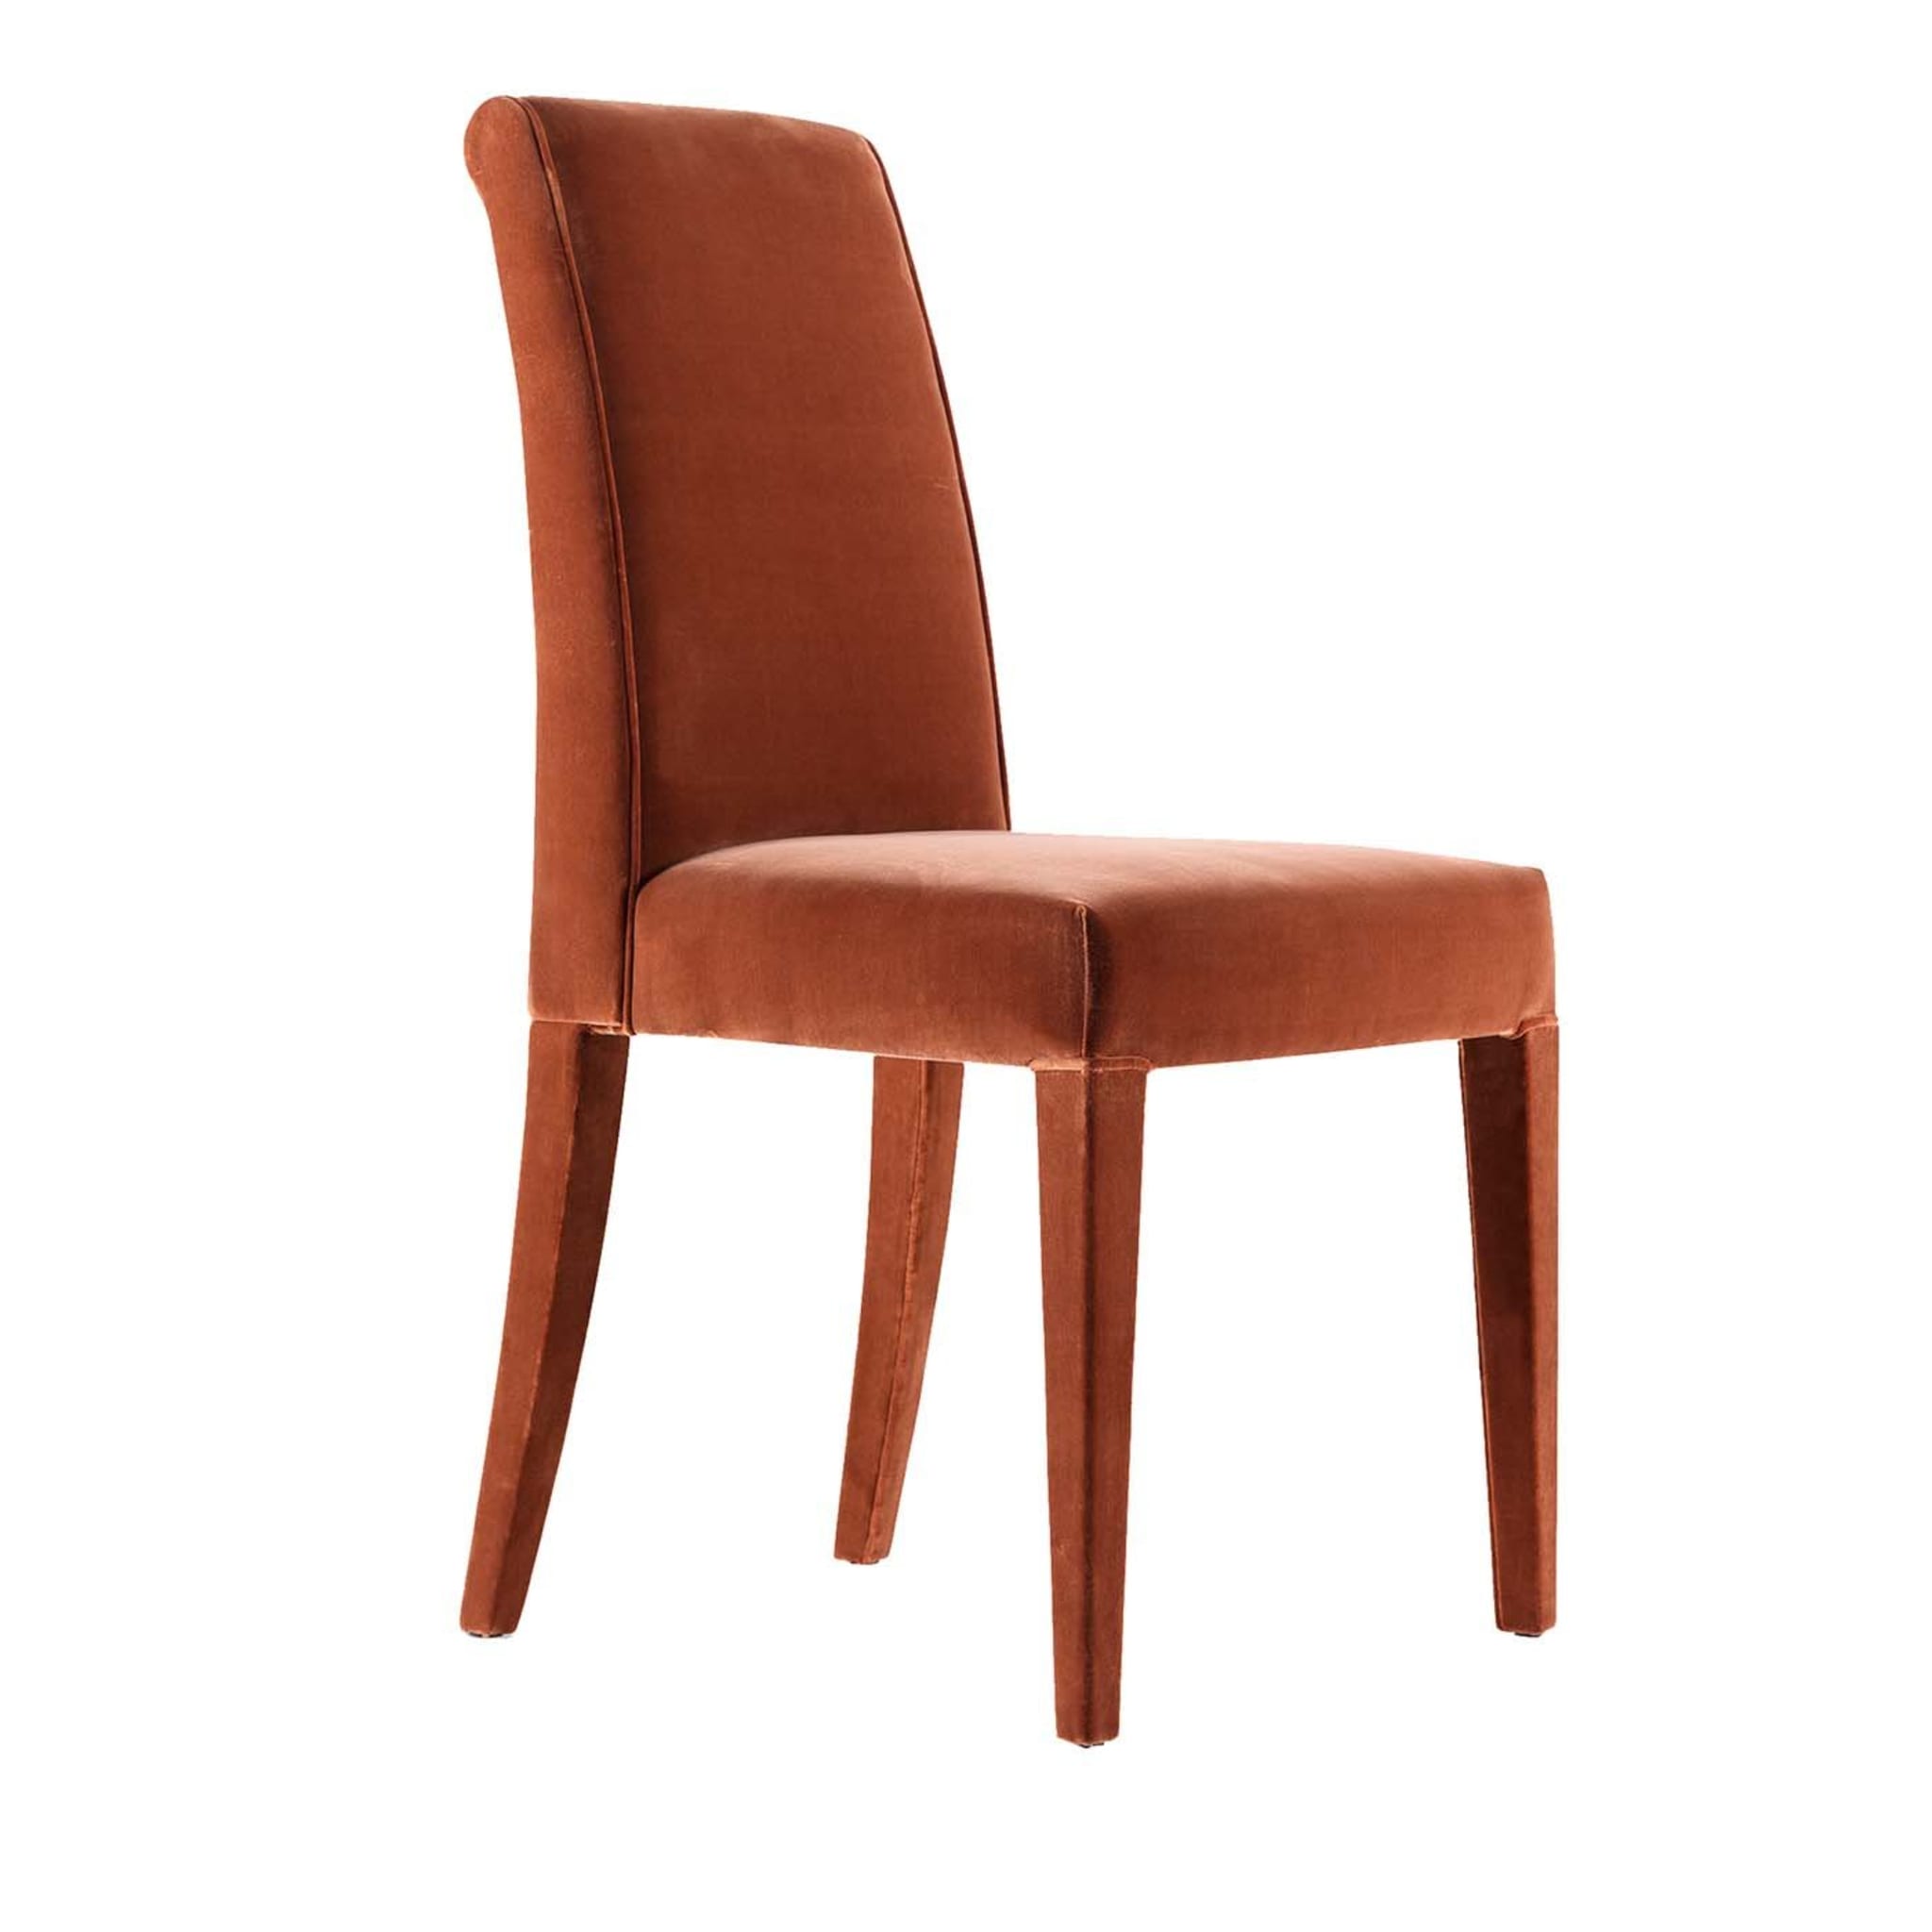 Zarafa Red Chair with Upholstered Legs - Main view